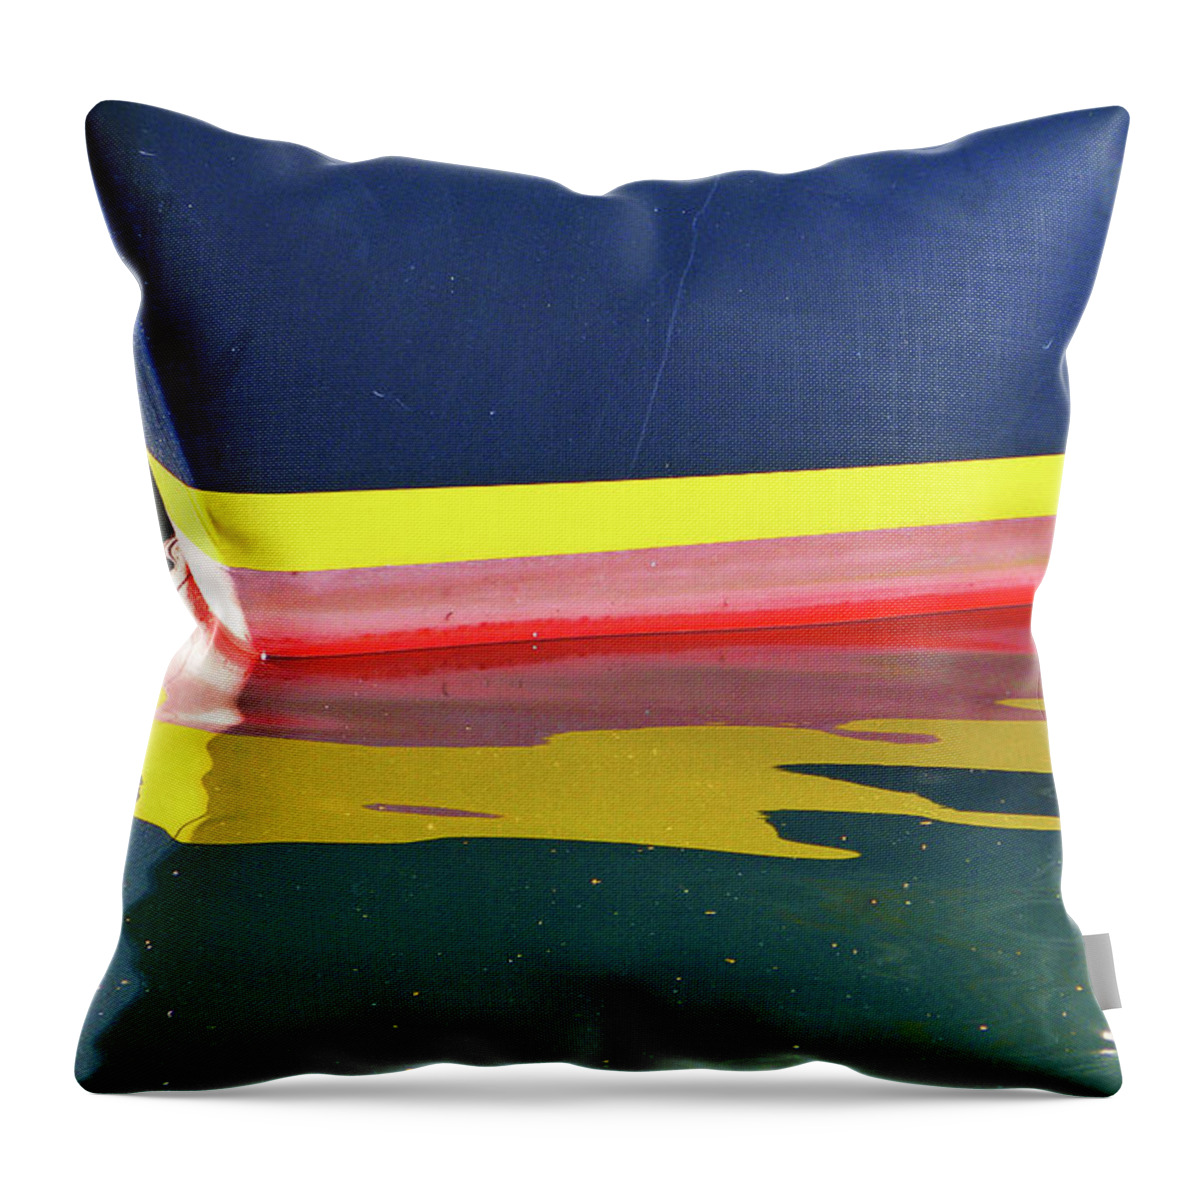 Blue Throw Pillow featuring the photograph Boat Reflection by Ted Keller